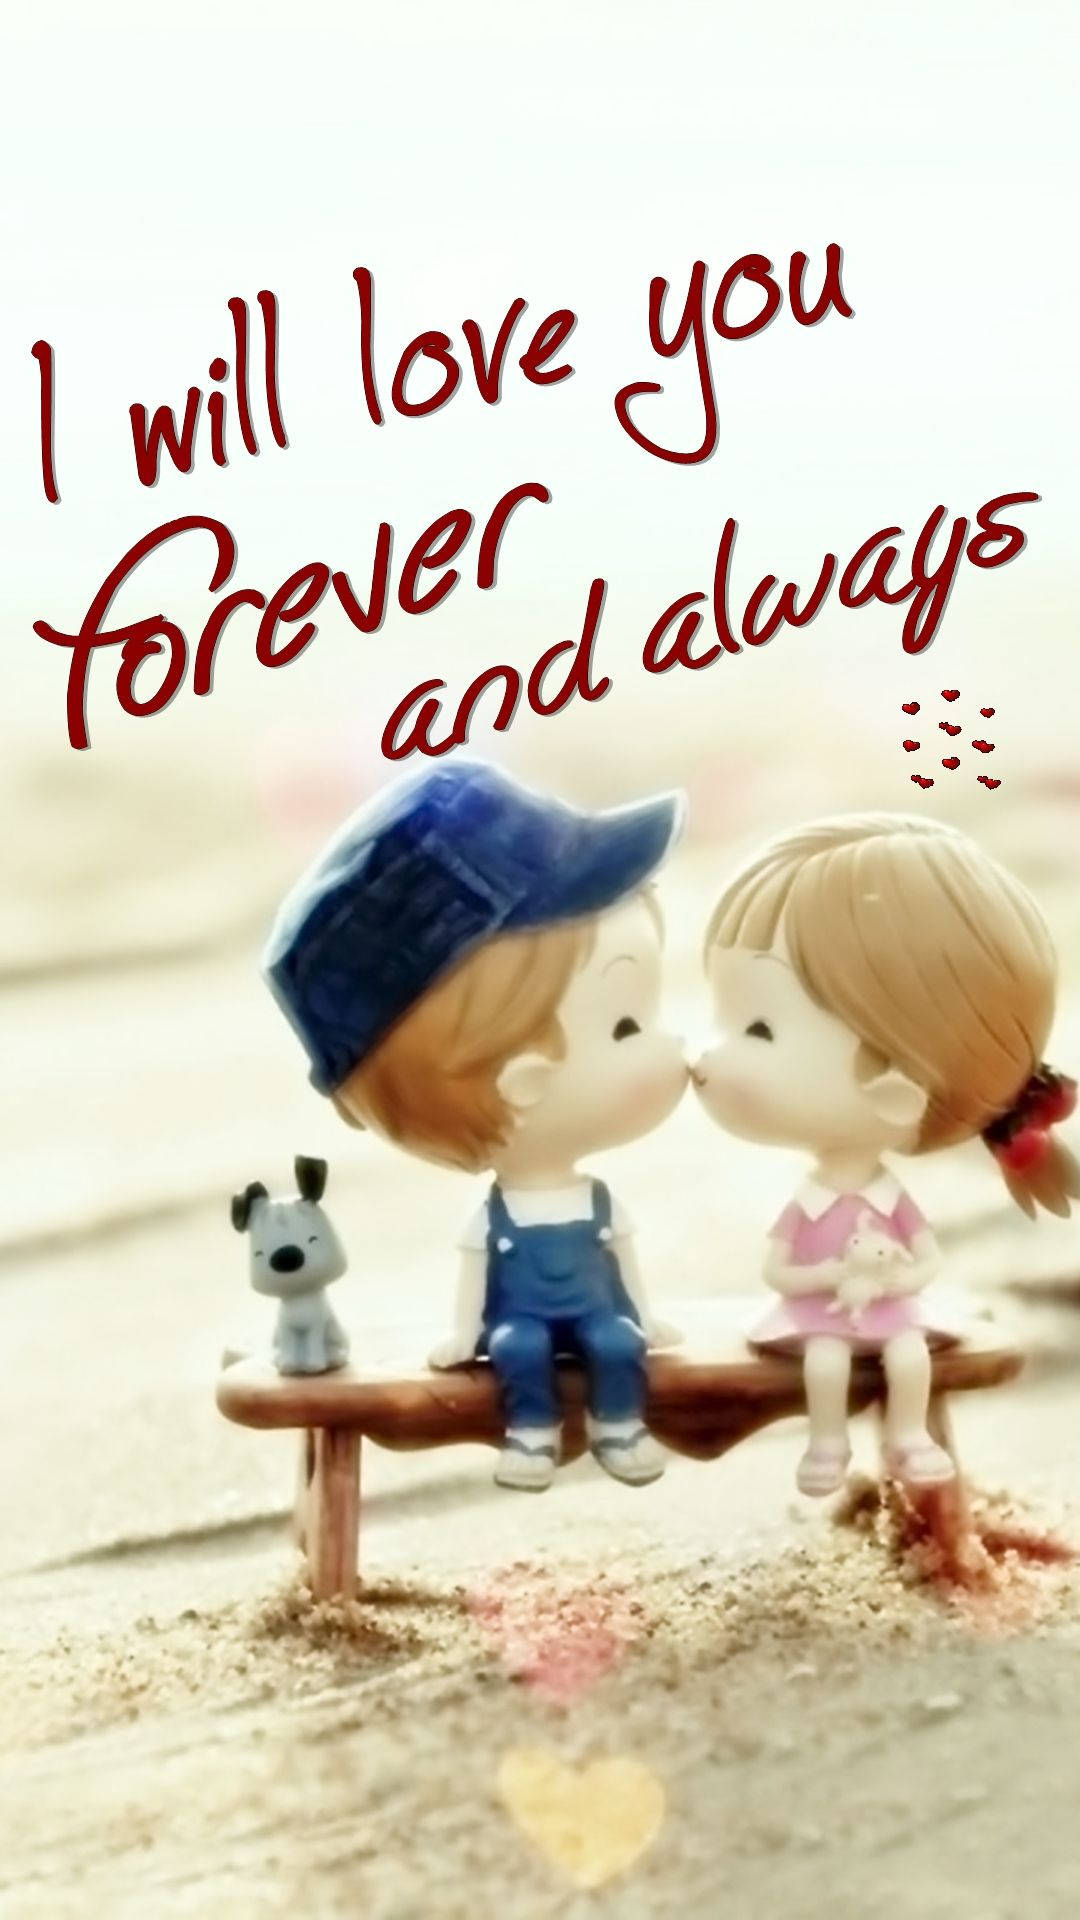 Cartoon Couple In Love Forever And Always Wallpaper